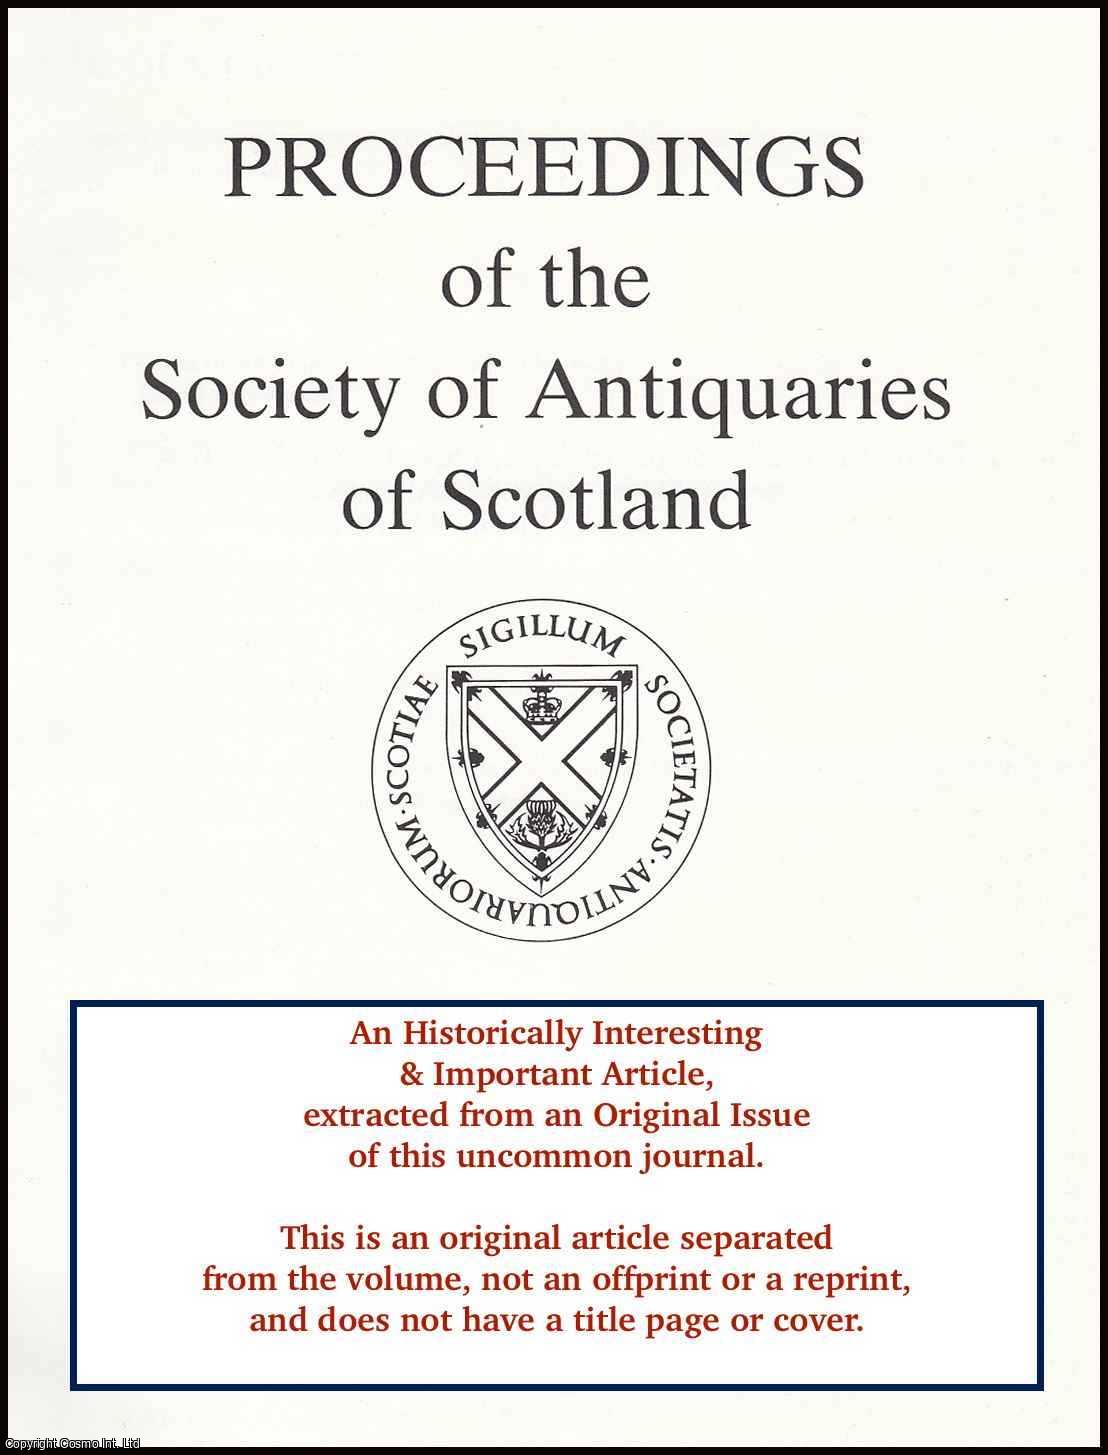 Leslie Alcock - From Realism to Caricature: Reflections on Insular Depictions of Animals and People. An original article from the Proceedings of the Society of Antiquaries of Scotland, 1998.